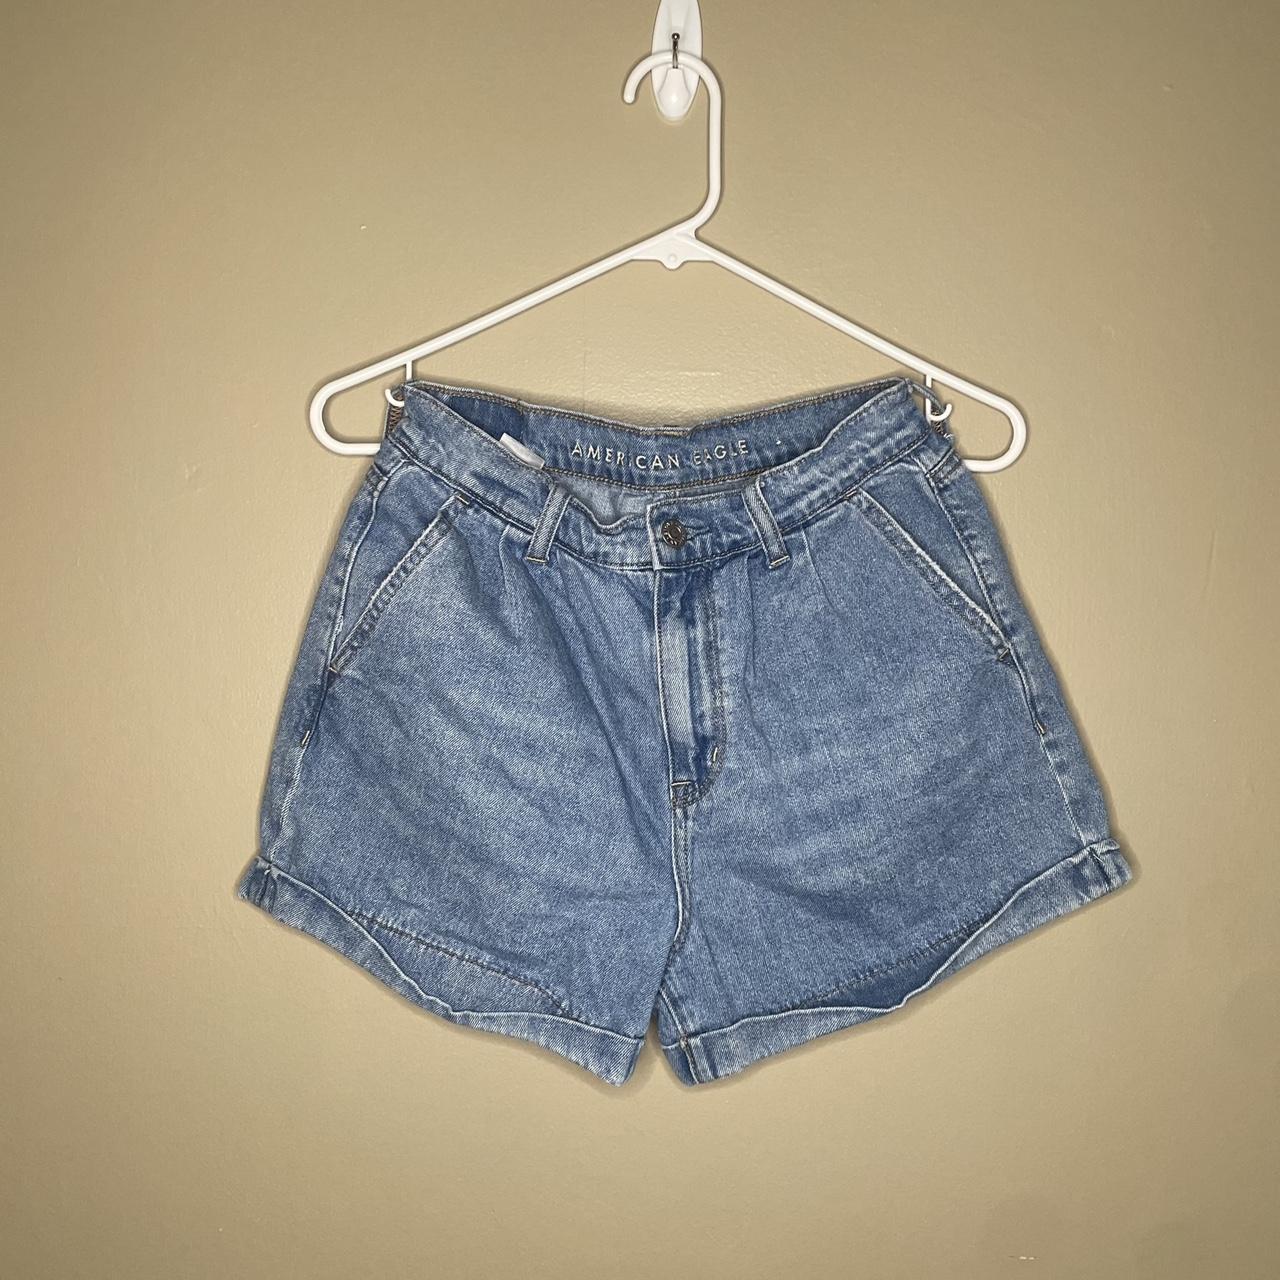 Mom Jean shorts So cute and baggy in the most... - Depop